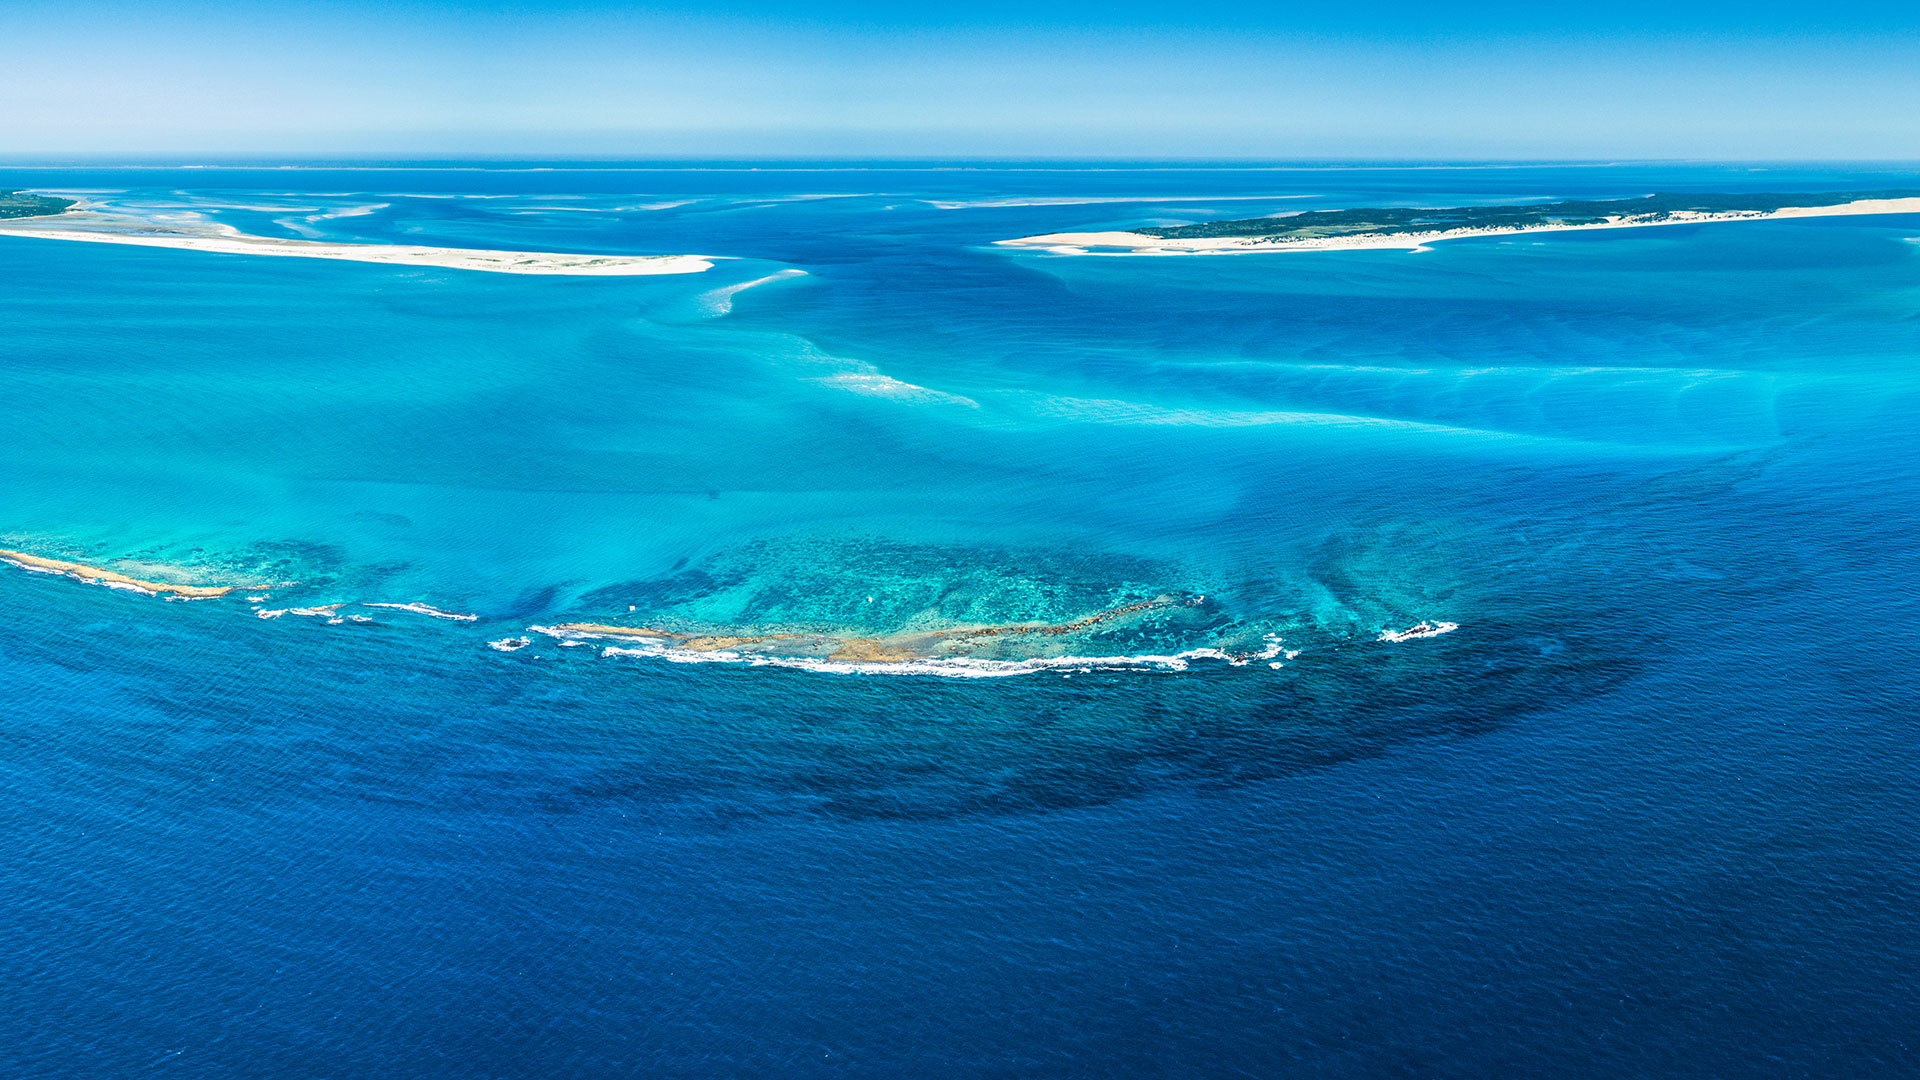 Aerial view of Two Mile Reef and Benguerra Island, Bazaruto Archipelago, Mozambique